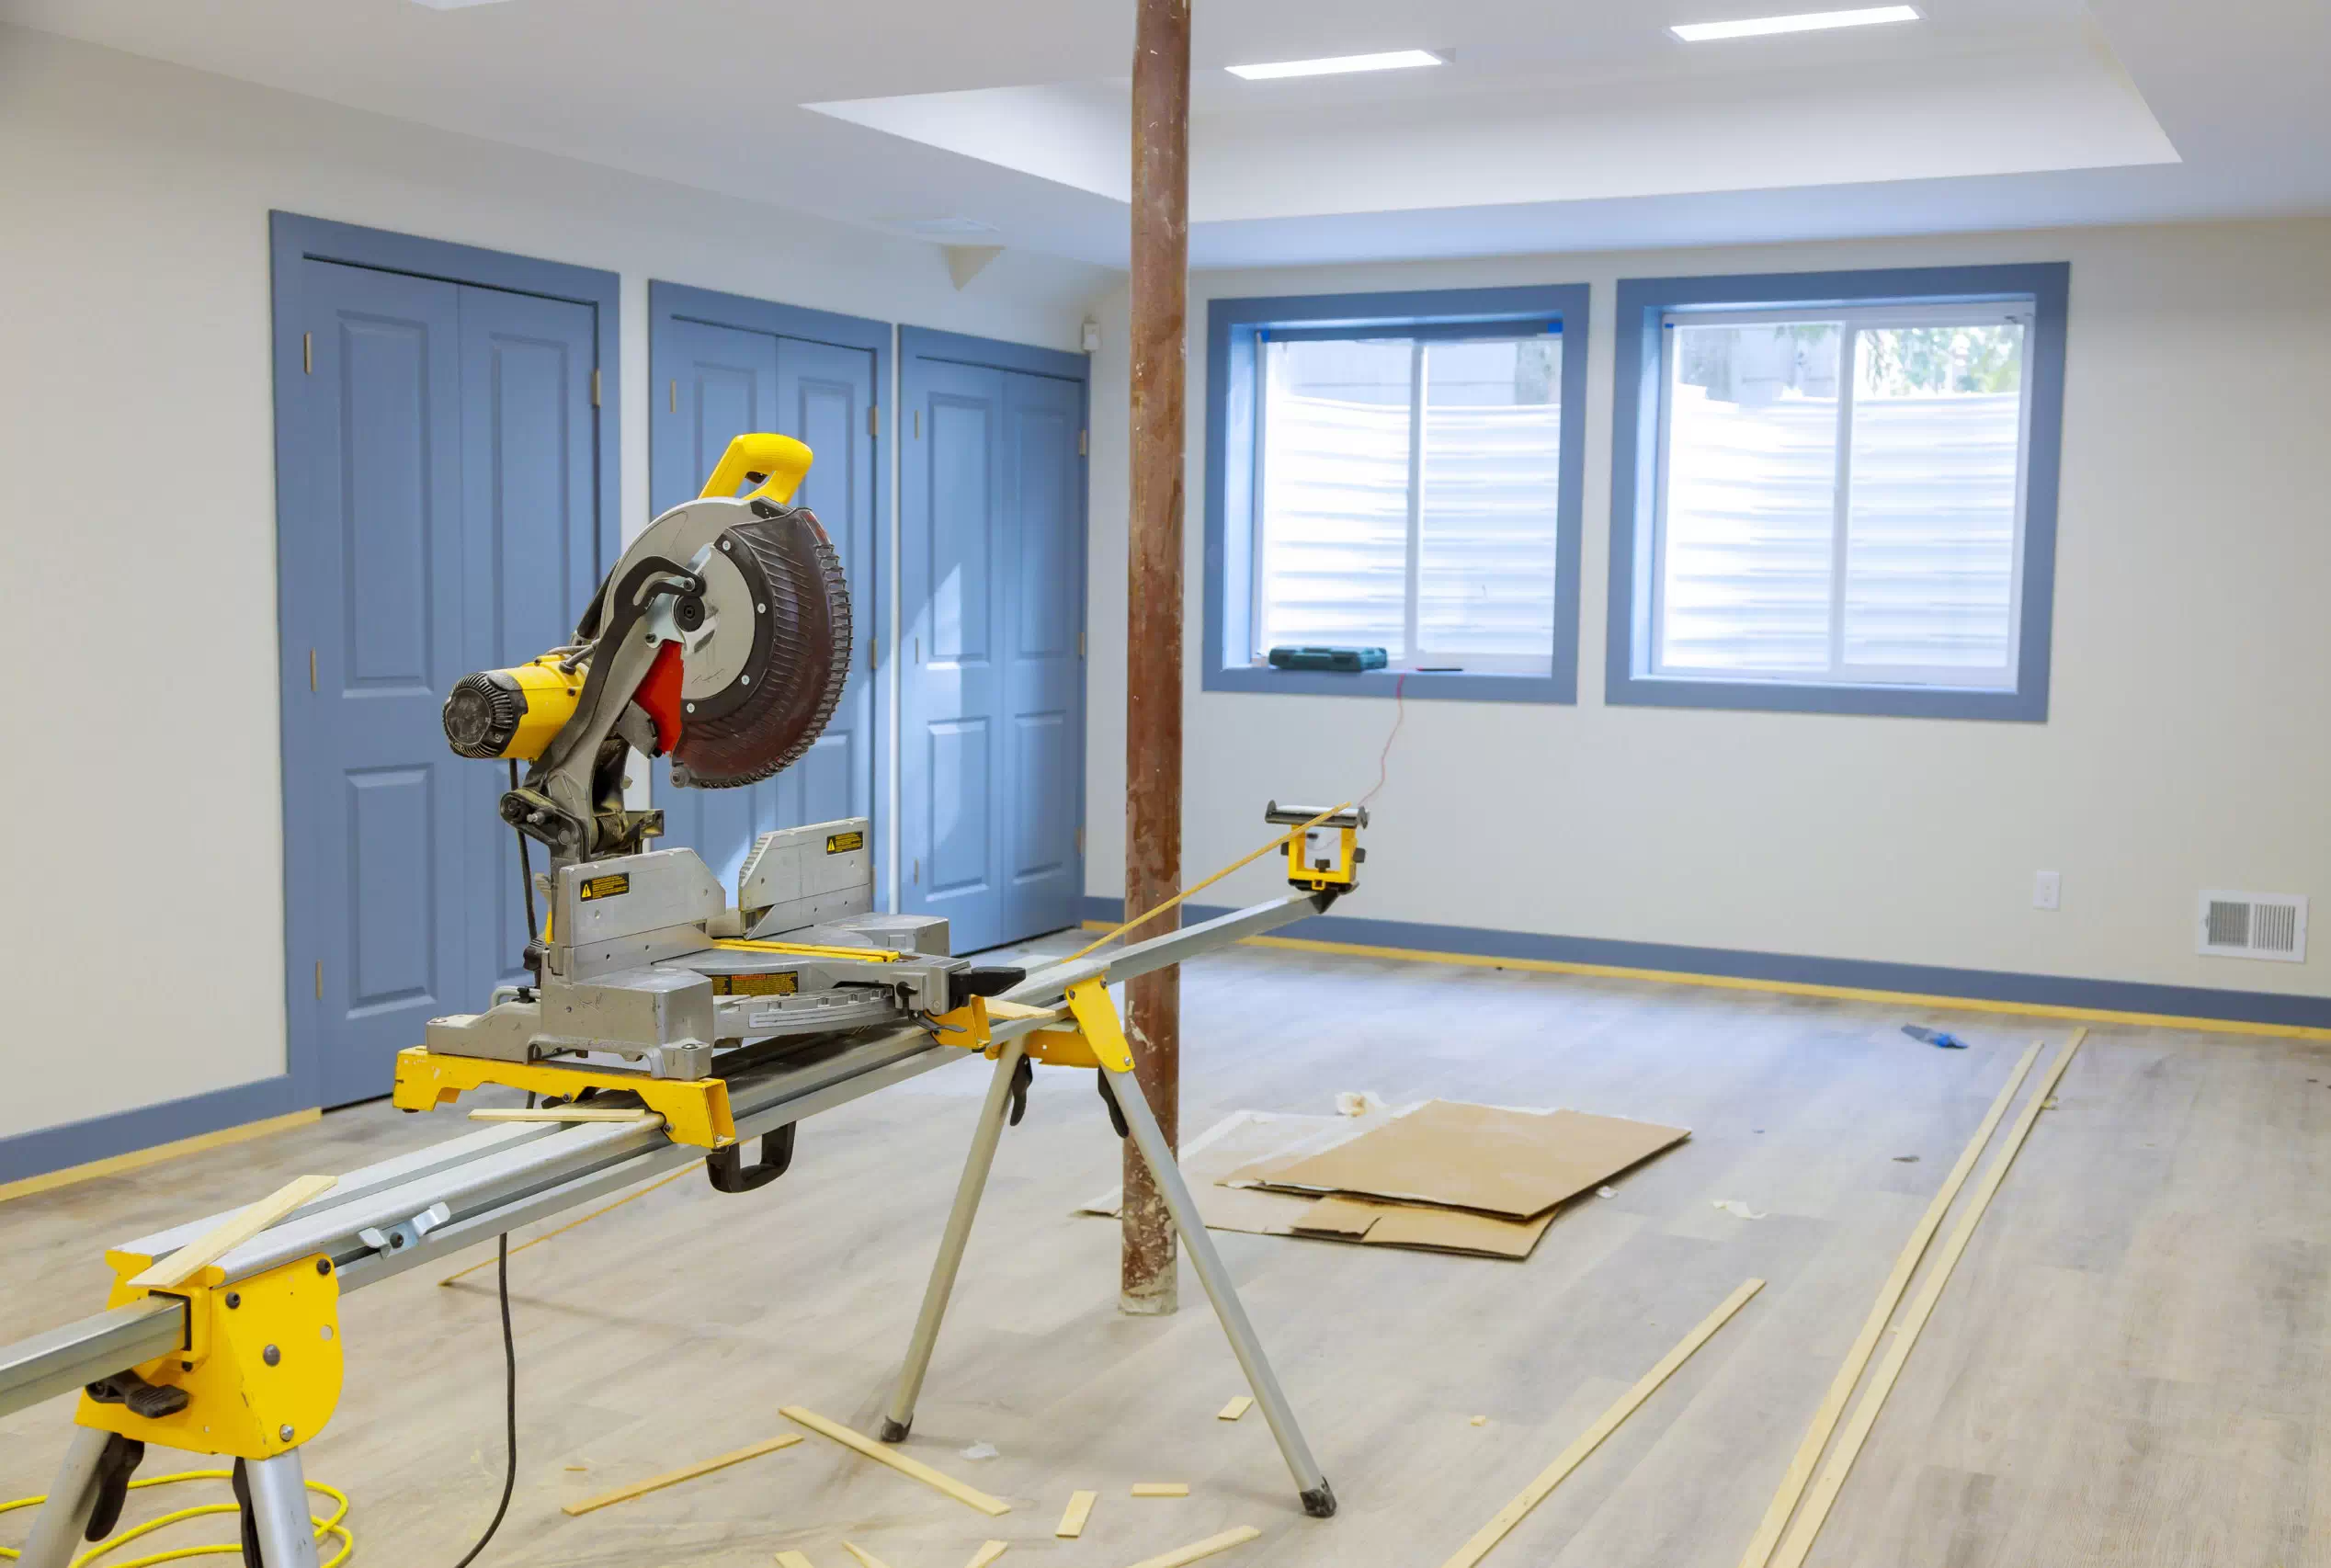  A trim work project with a miter saw in the middle of the room